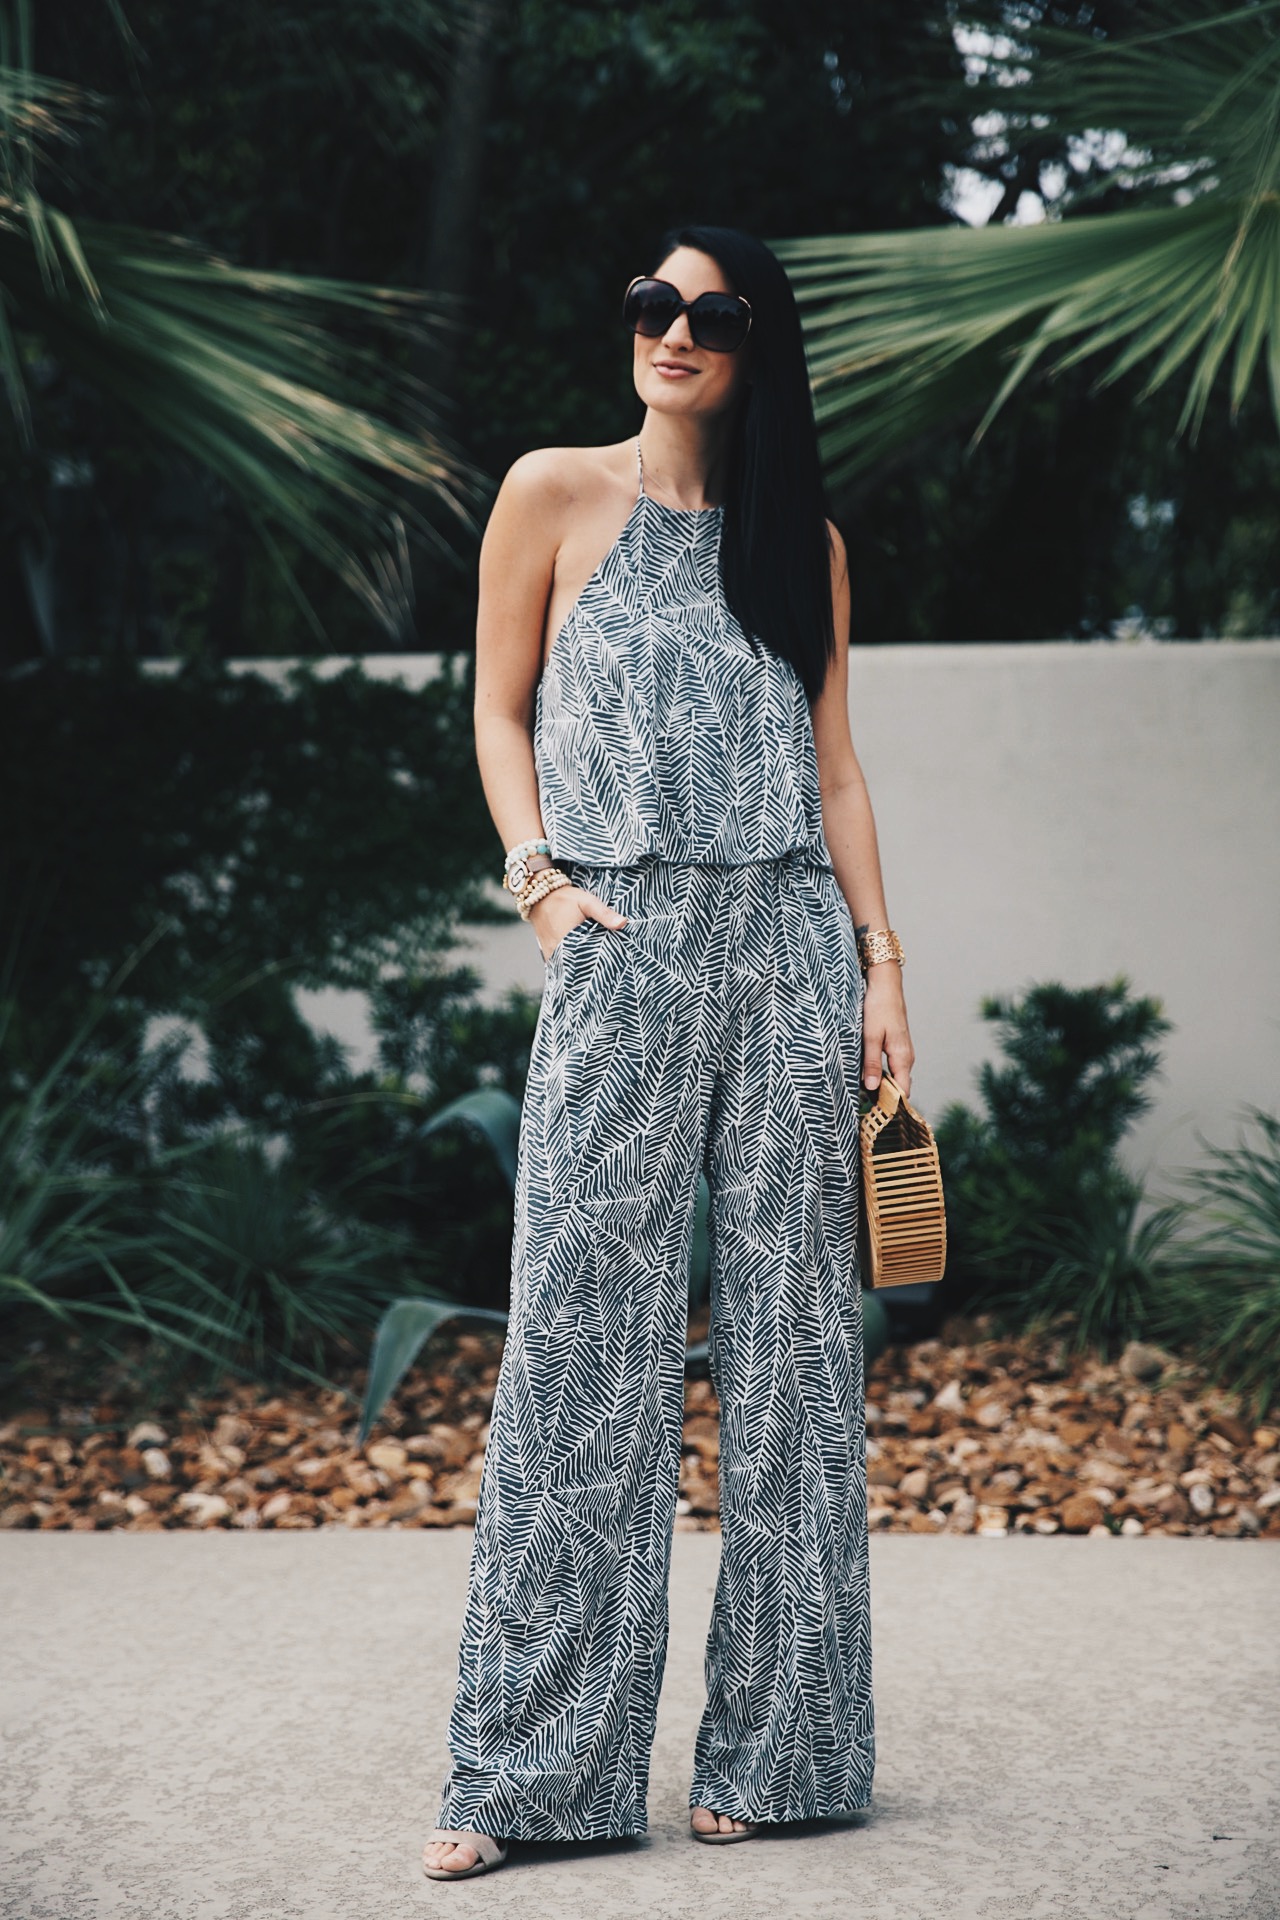 DTKAustin shares details on one of her go-to women's boutiques; Red Dress Boutique along with this beautiful palm print jumpsuit and Japanese bamboo bag. | how to style a jumpsuit | how to wear a jumpsuit | fall fashion tips | fall outfit ideas | fall style tips | what to wear for fall | cool weather fashion | fashion for fall | style tips for fall | outfit ideas for fall || Dressed to Kill